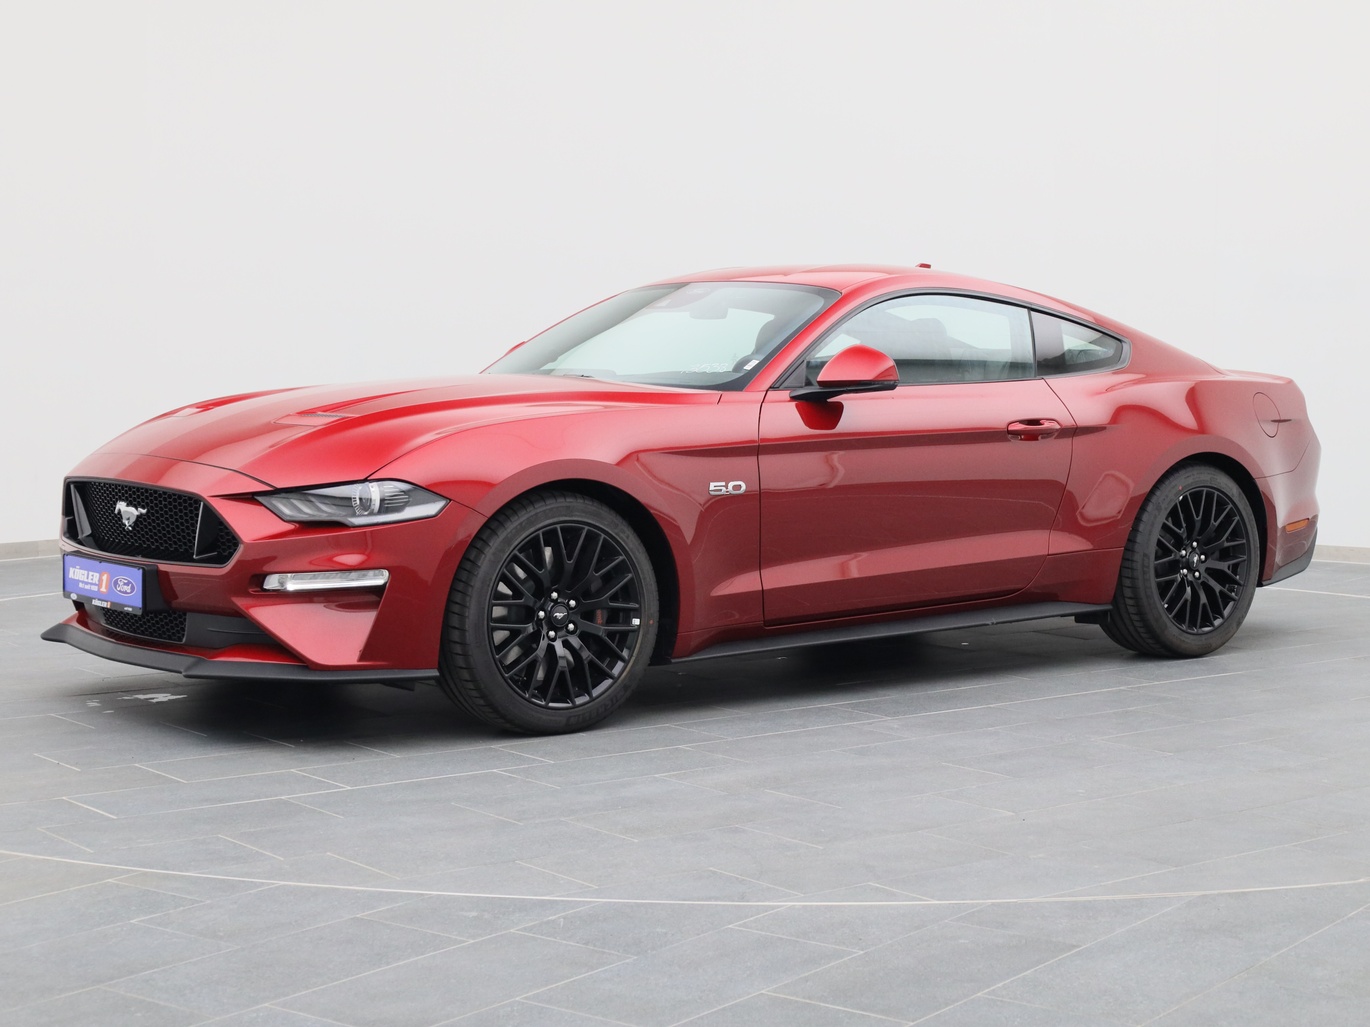  Ford Mustang GT Coupé V8 450PS / Premium 2 / B&O in Lucid Rot 